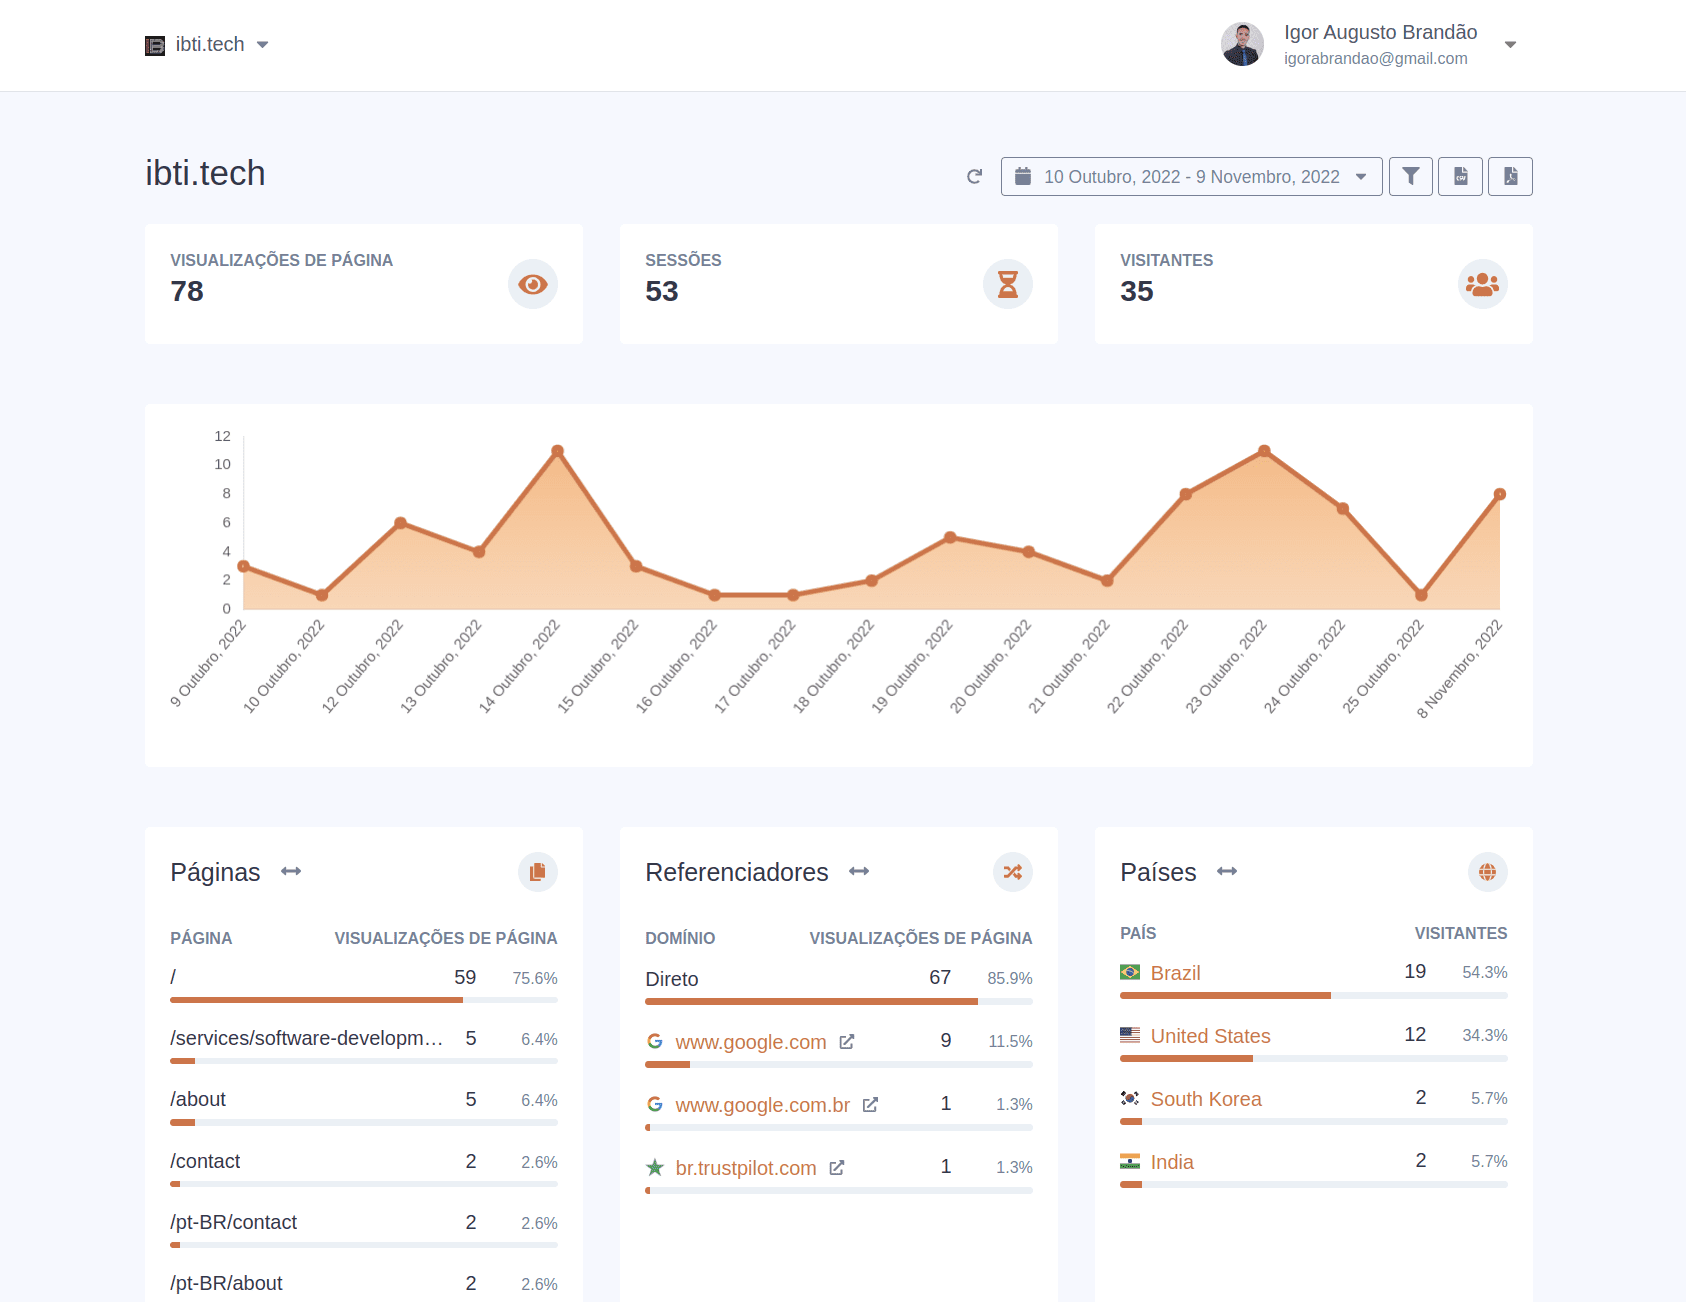 Dashboard with statistics of your sites image